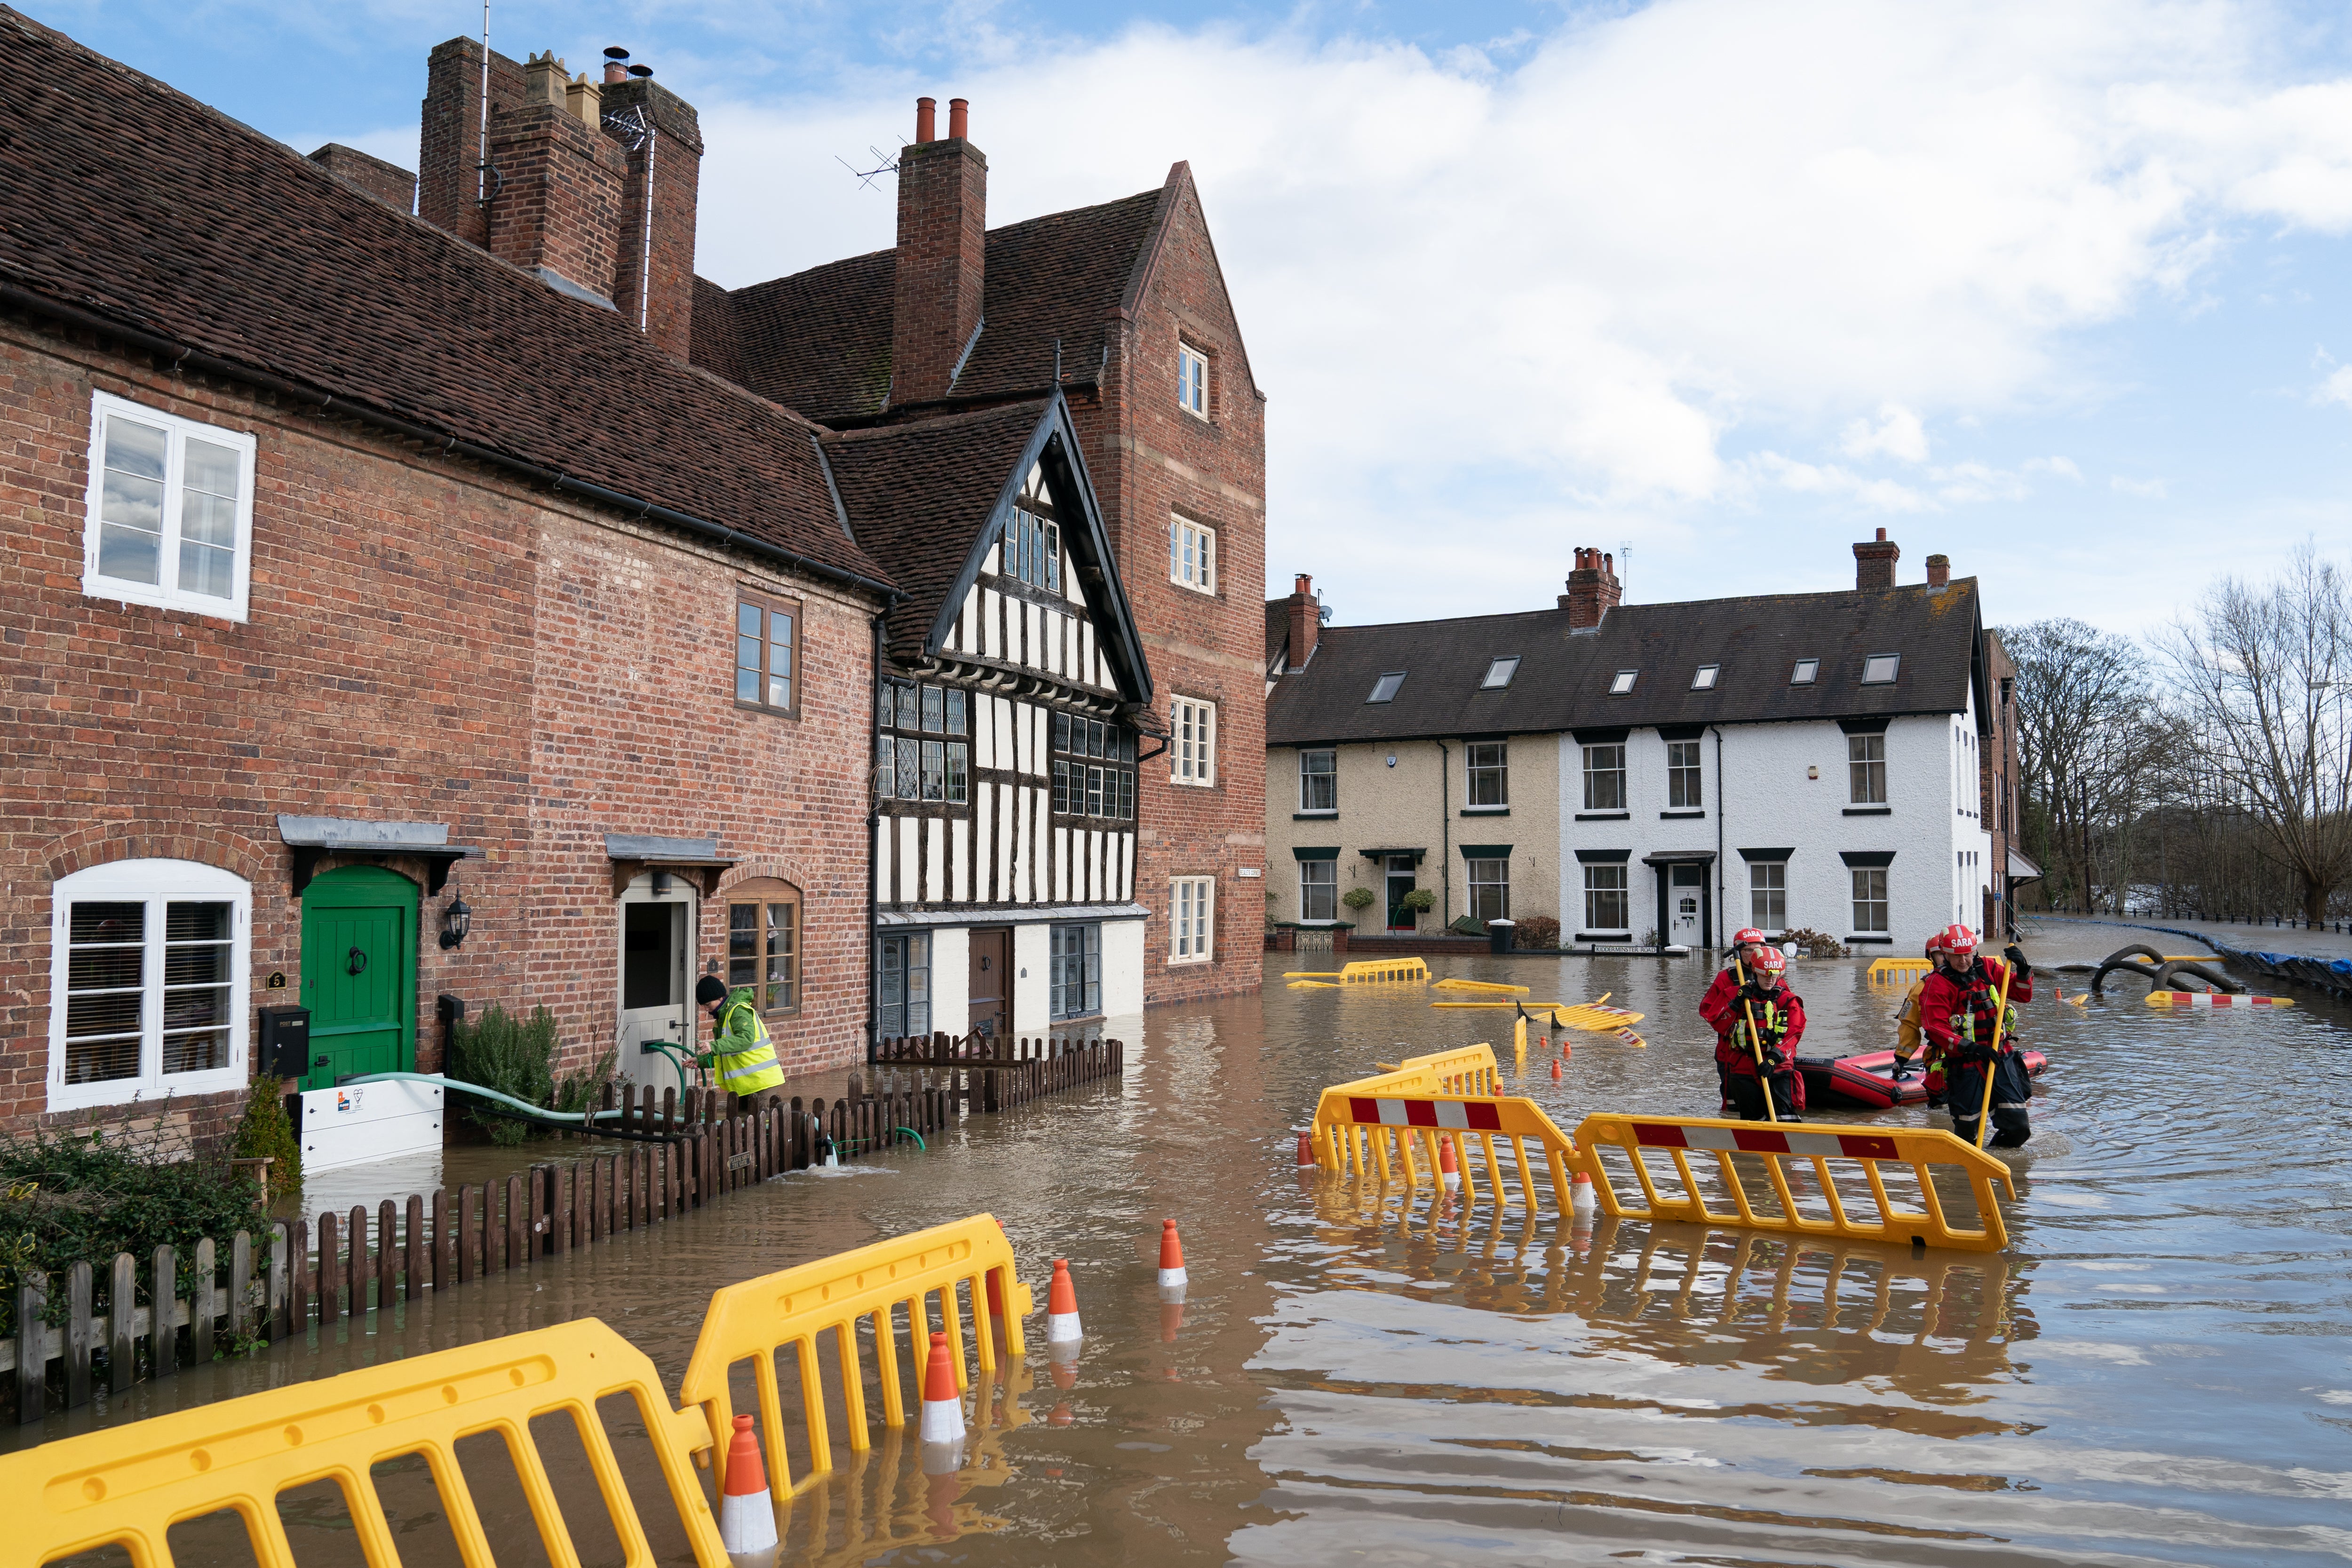 Search and rescue teams have checked on residents in Bewdley, in Worcestershire, where floodwater from the River Severn has breached the town’s flood defences (Joe Giddens/PA)